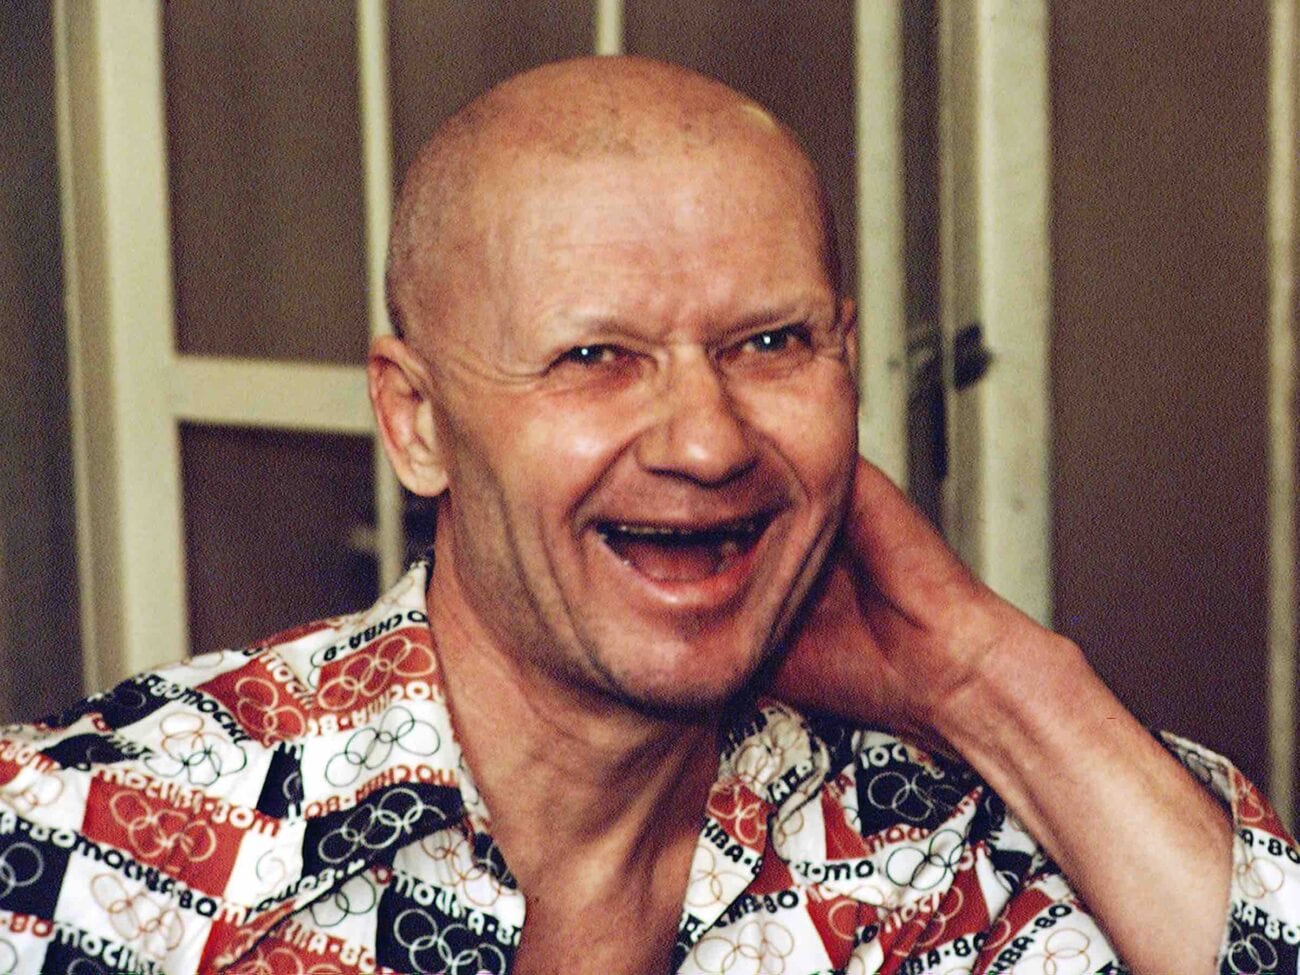 In the 12 years Andrei Chikatilo committed his murders, what made him become the “Butcher of Rostov”? Here's what we know about Andrei Chikatilo.